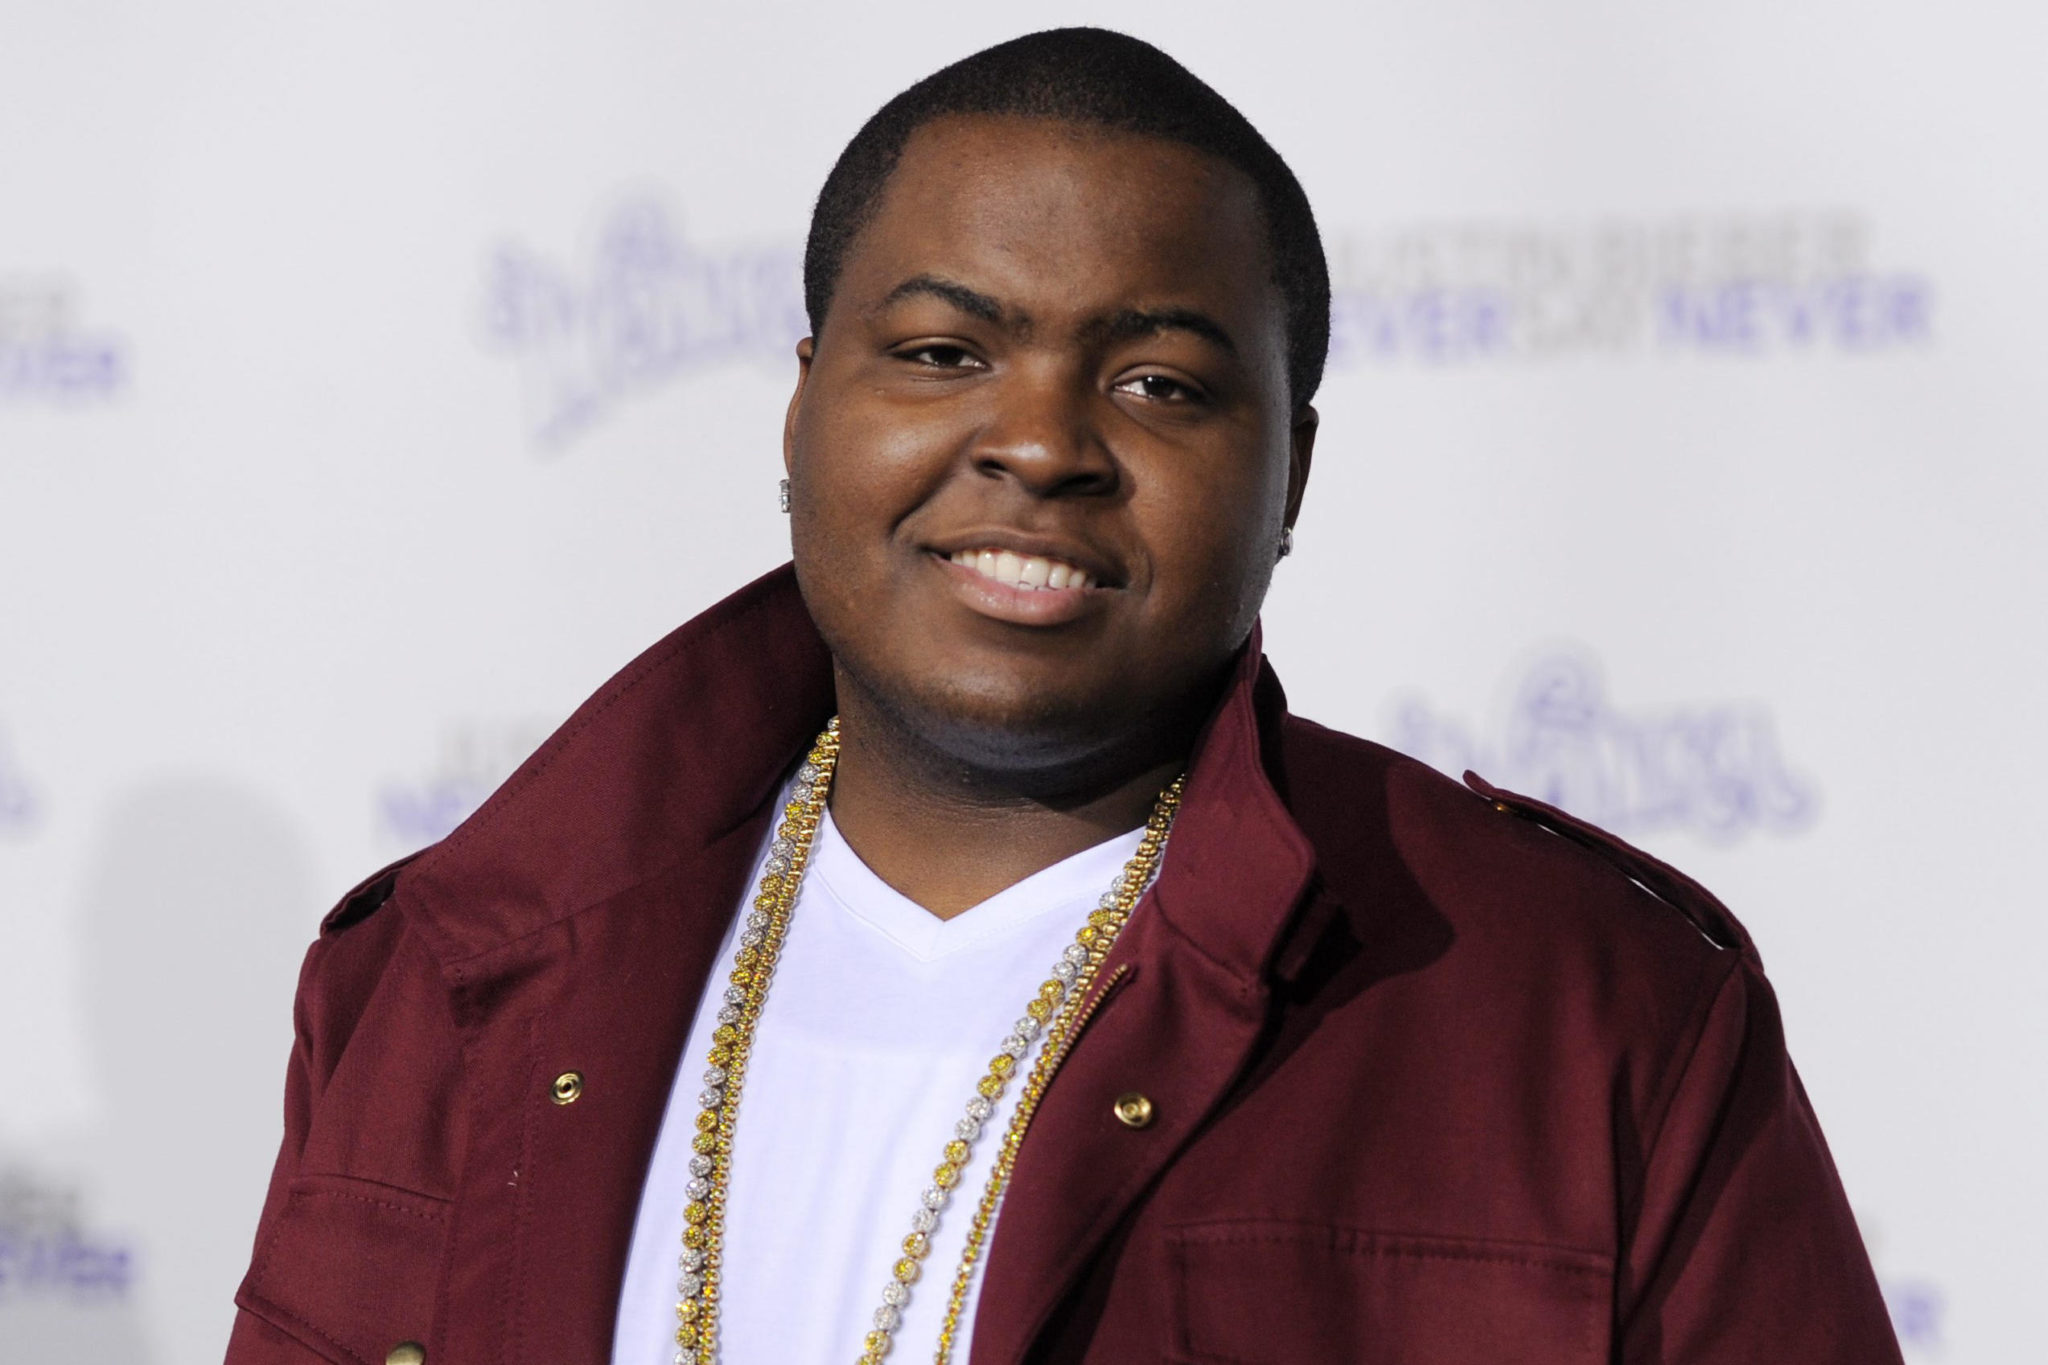 Singer Sean Kingston faces 10 charges in Florida fraud case